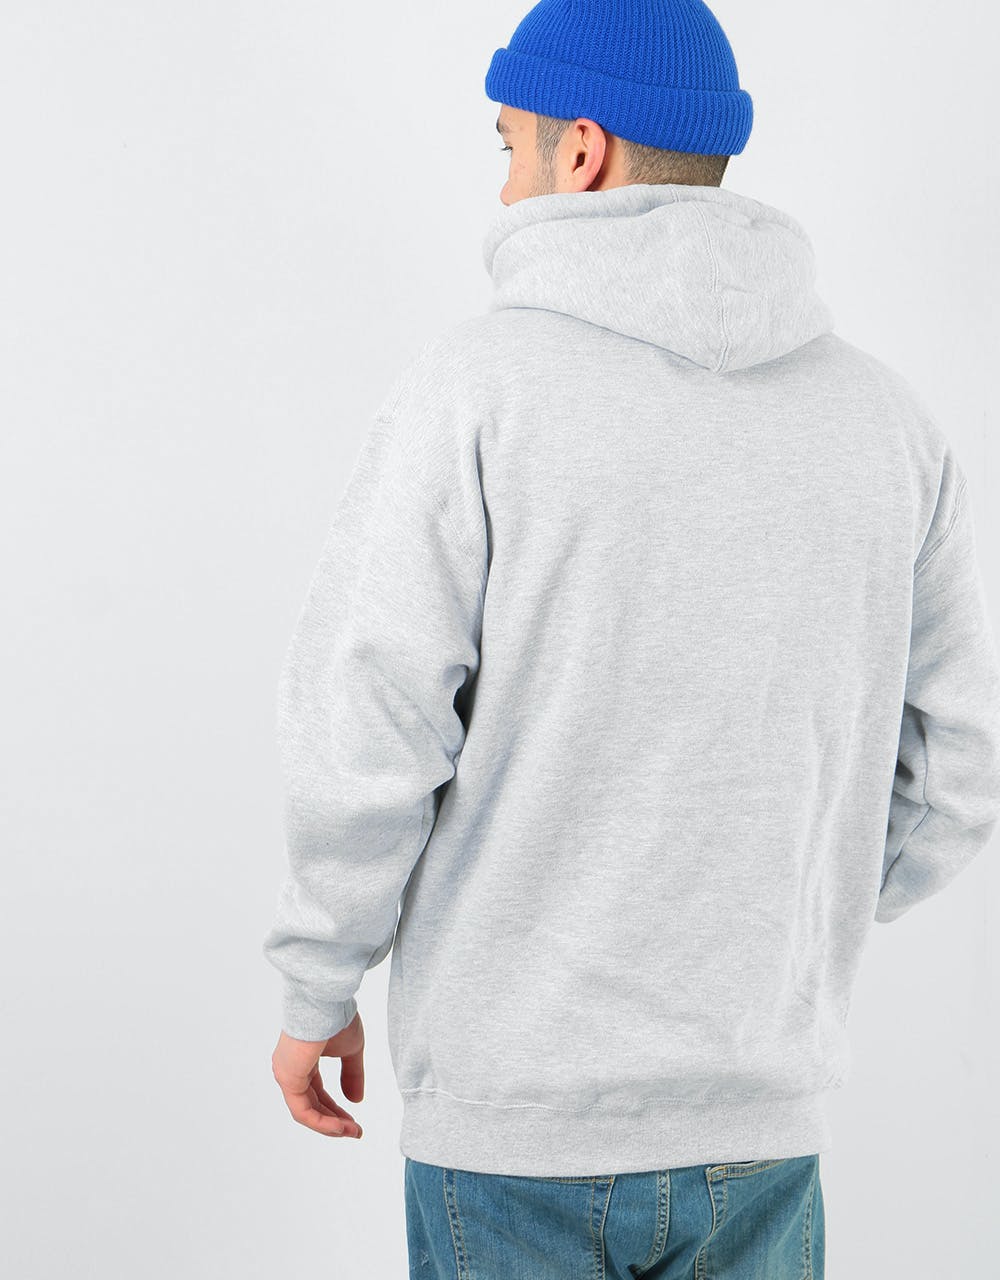 Colourblind 98 Pullover Hoodie - Heather Grey